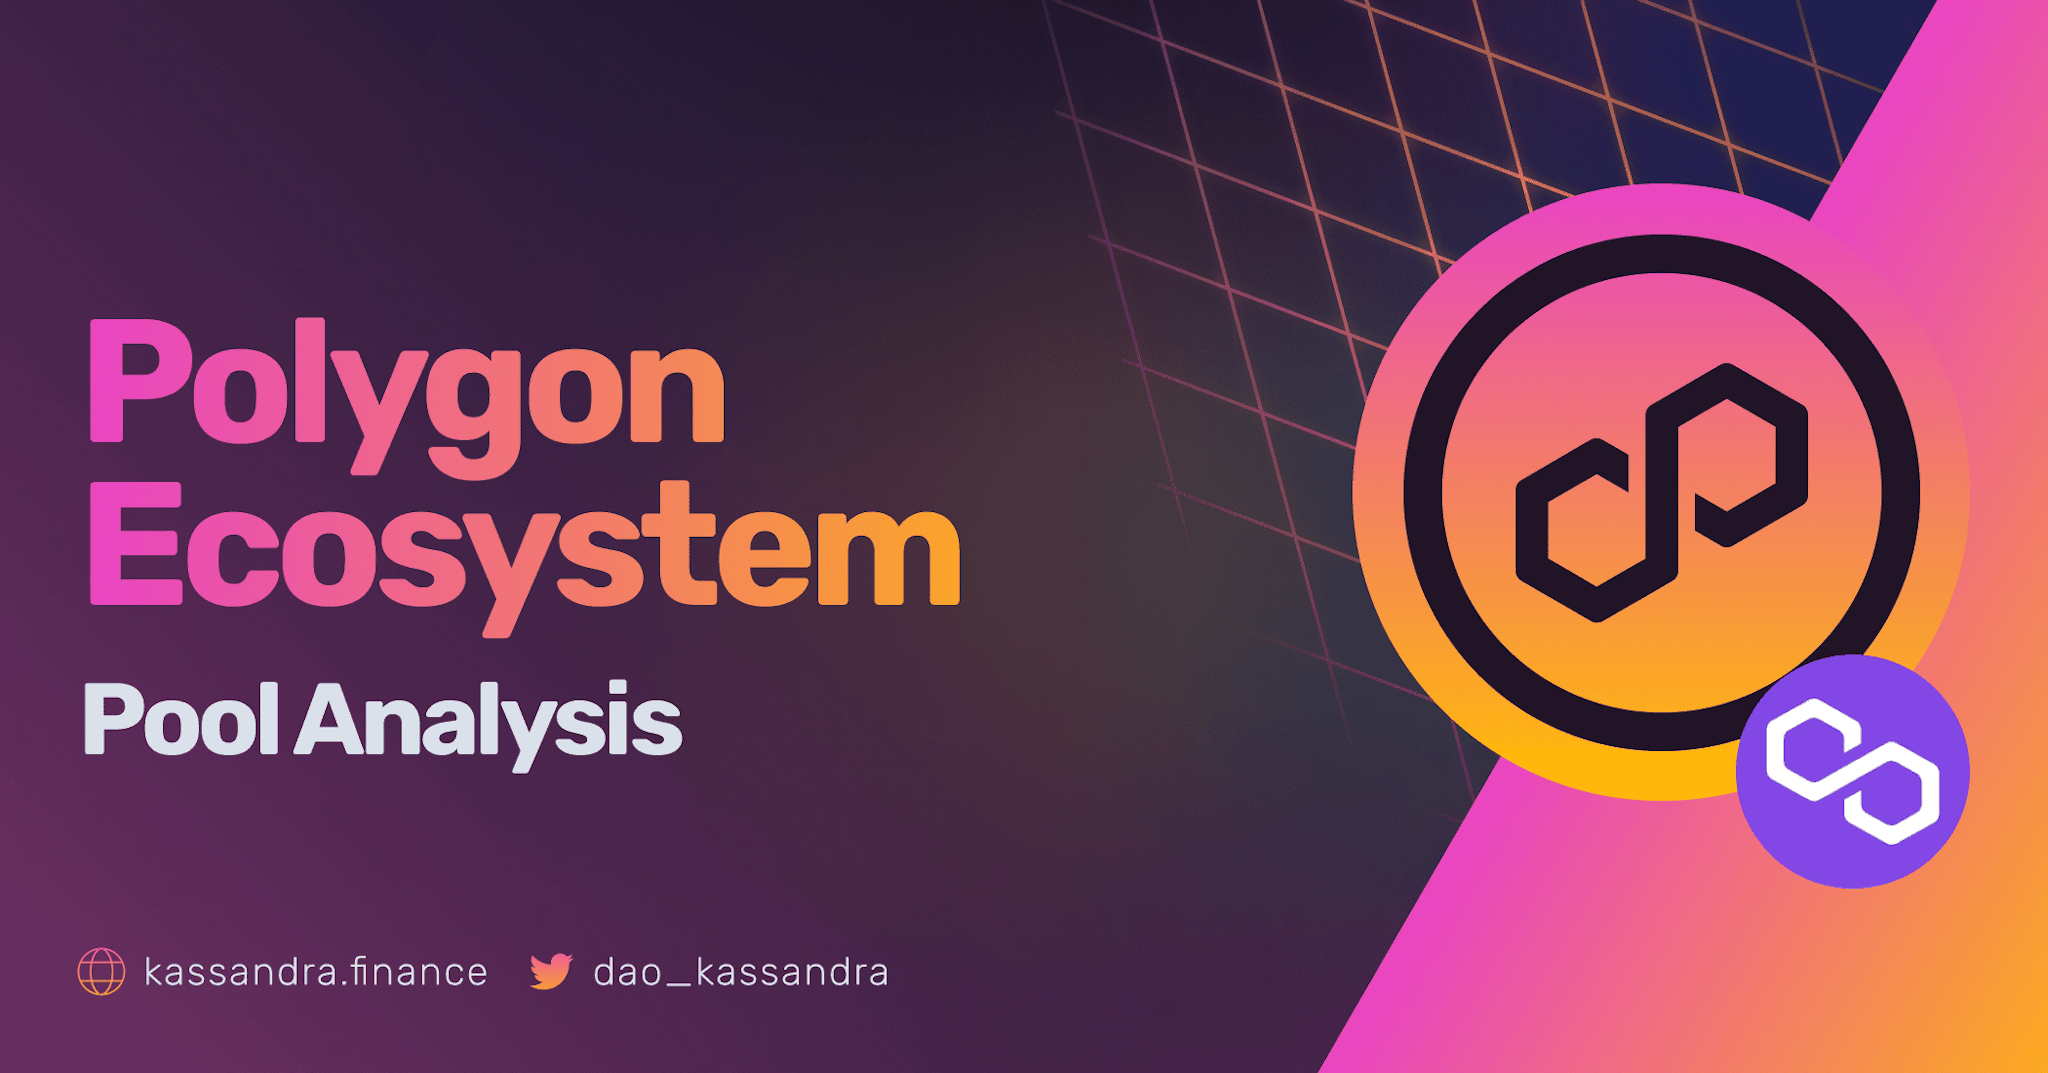 A card with Kassandra's Visual Identity with the words "Polygon Ecosystem Pool Analysis", in reference with Kassandra's Managed Pools.